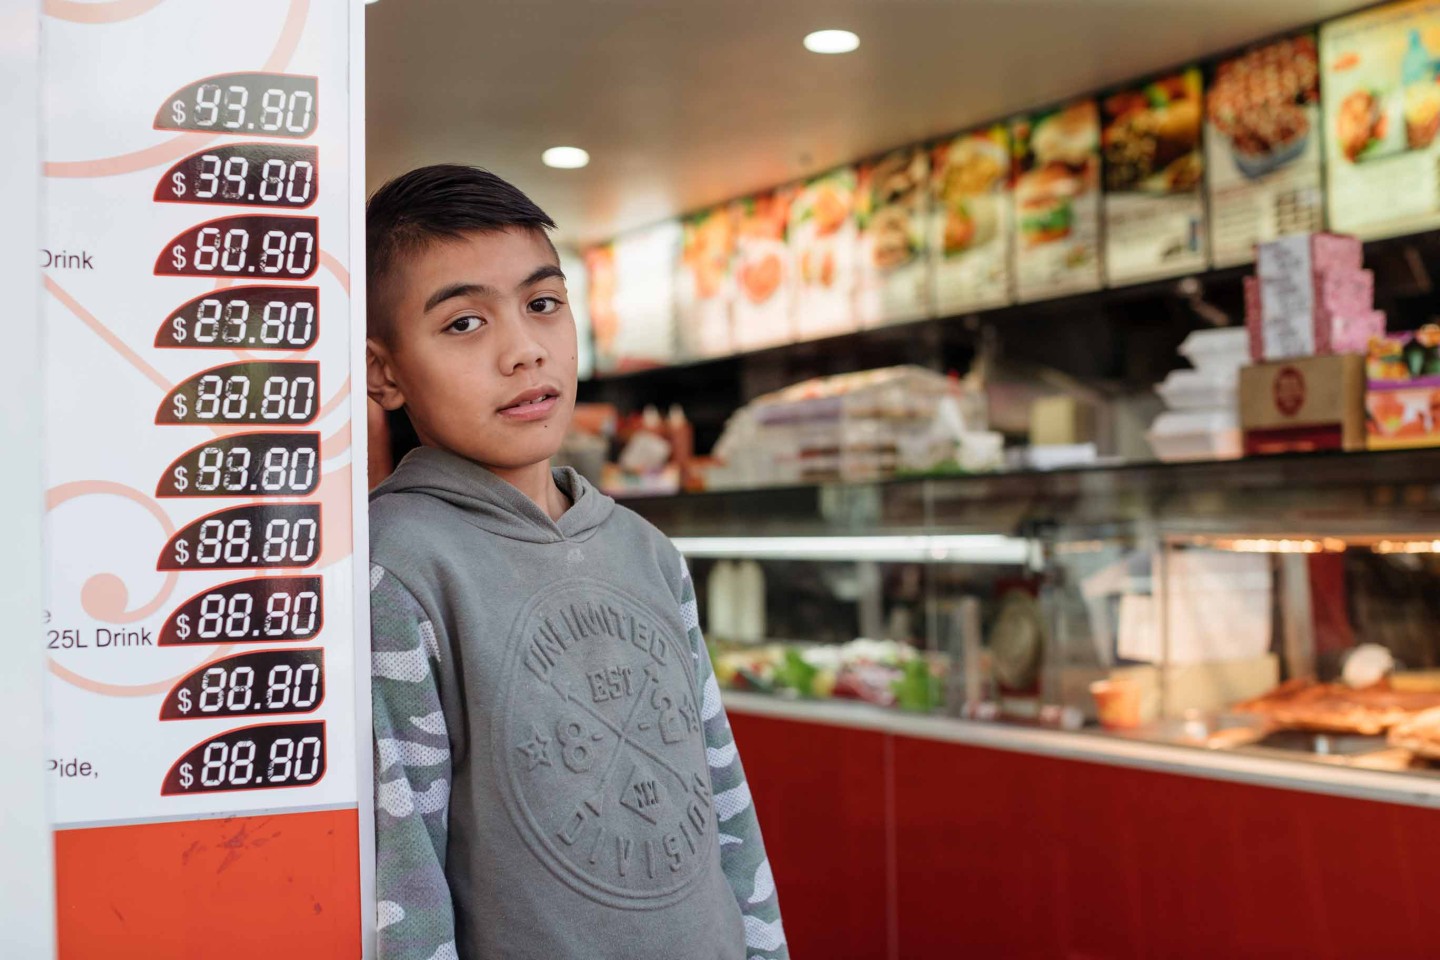 A young person leans against the wall of a takeaway shop